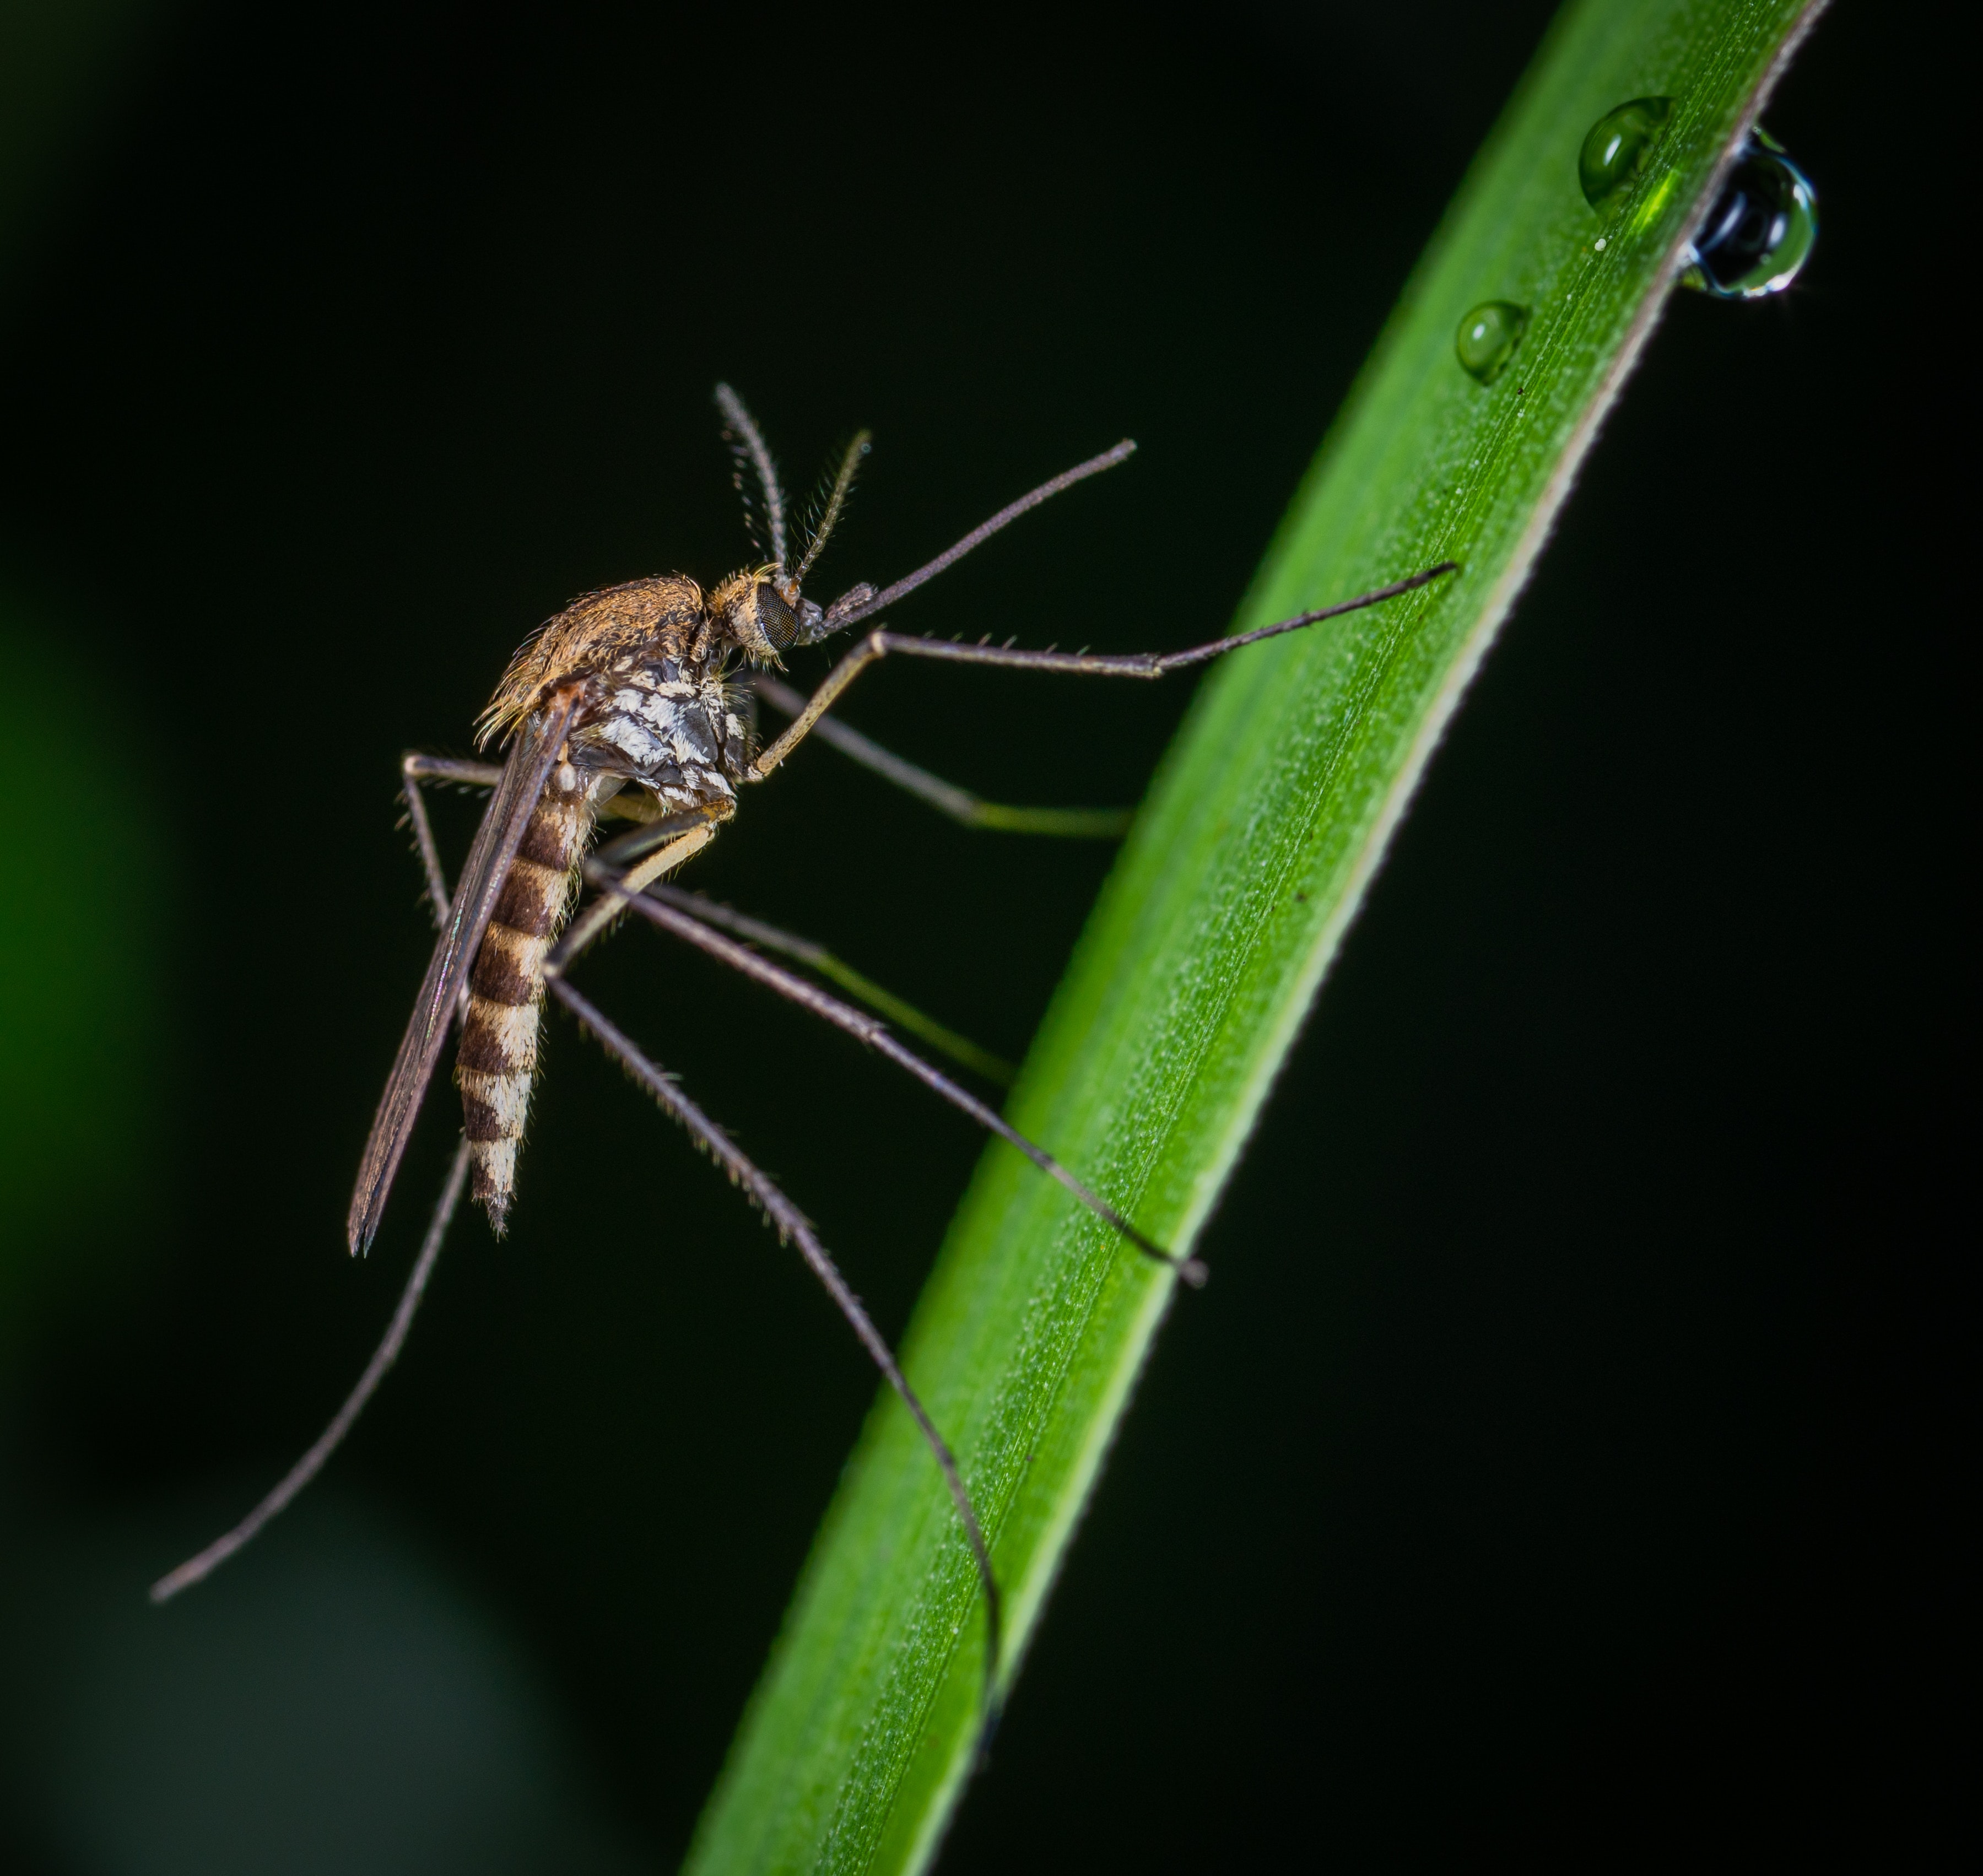 Mosquito on green plant stem